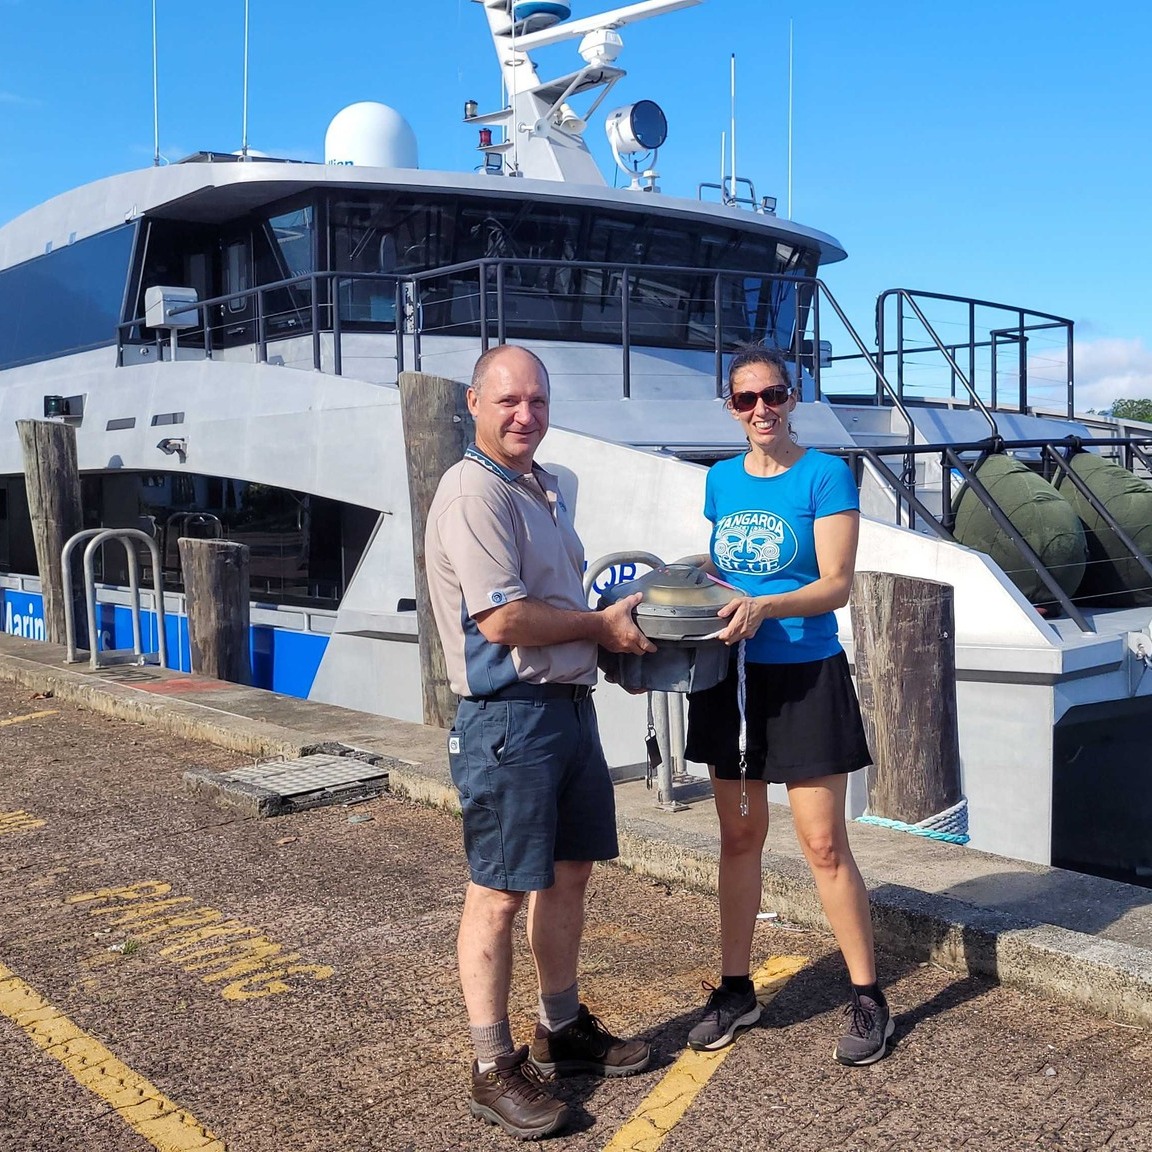 Another day, another #ProjectReCon buoy delivered. This one is going onboard Queensland Parks And Wildlife Service's Reef Ranger! @SatlinkSL #GlobalGhostGearInitiative #GGGI #CitizenScience #GhostNetWatch #OceanConservation #AMDI